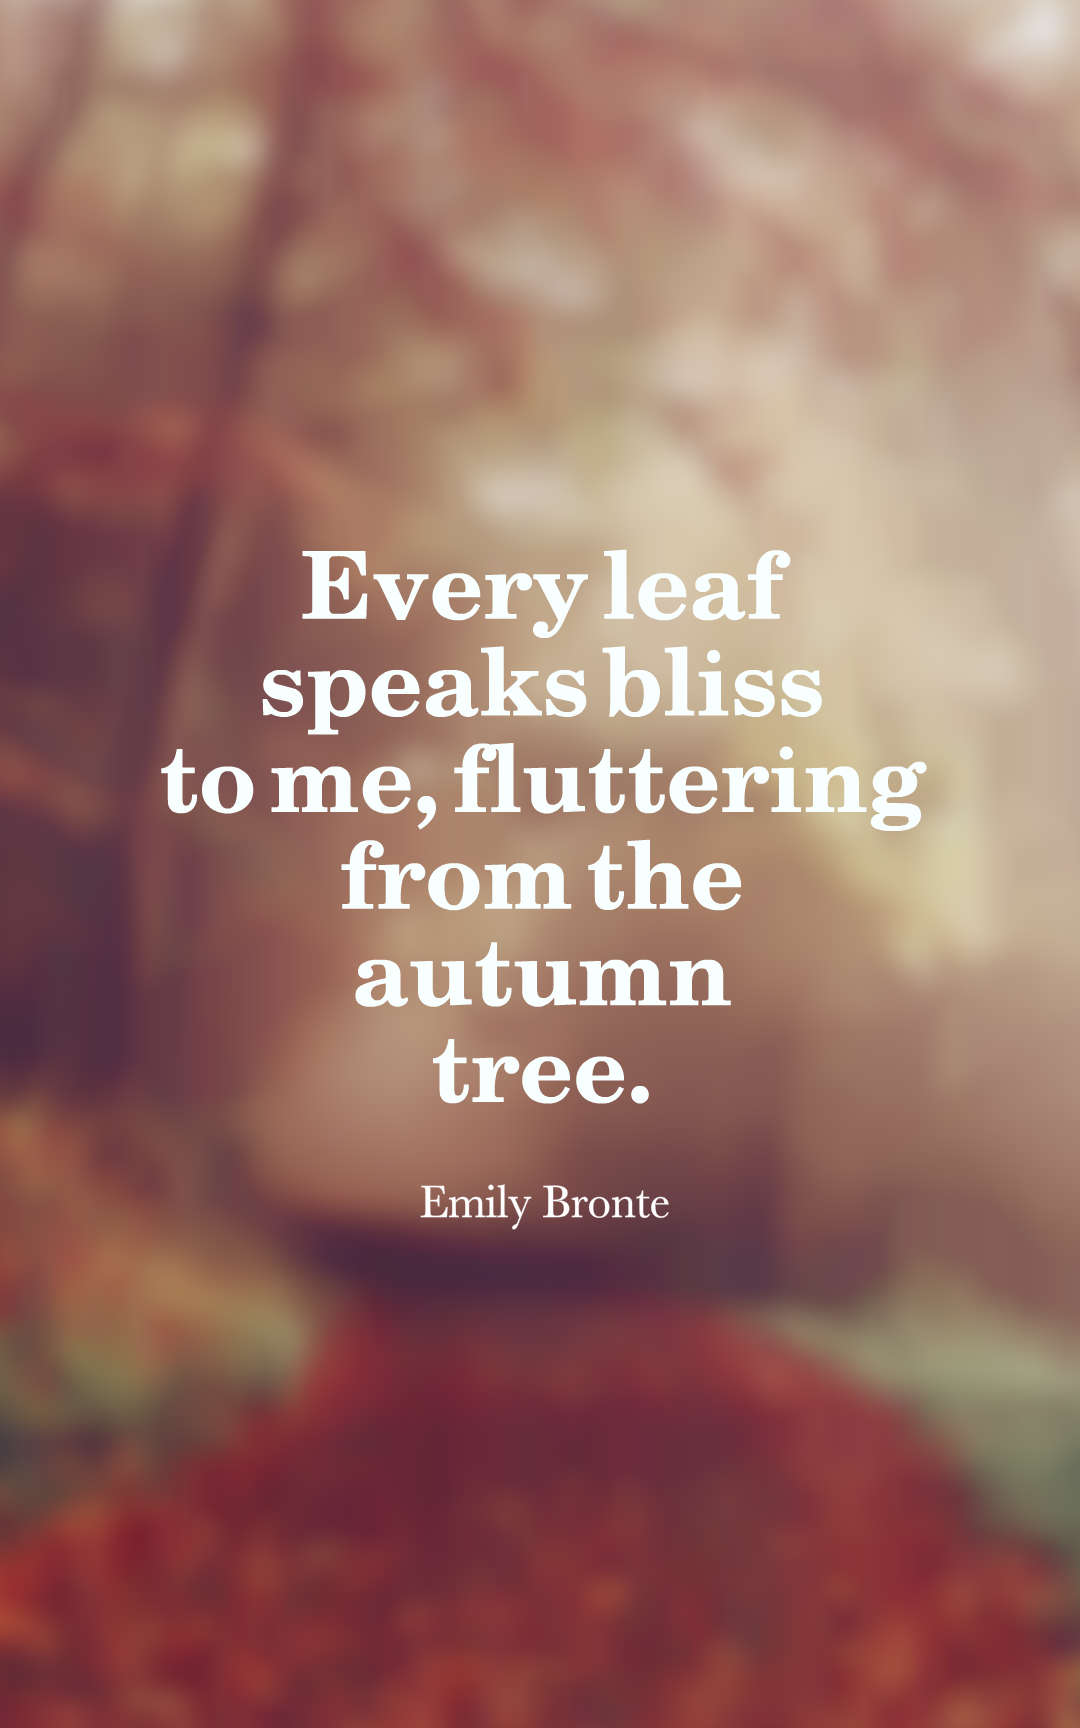 Every leaf speaks bliss to me, fluttering from the autumn tree.